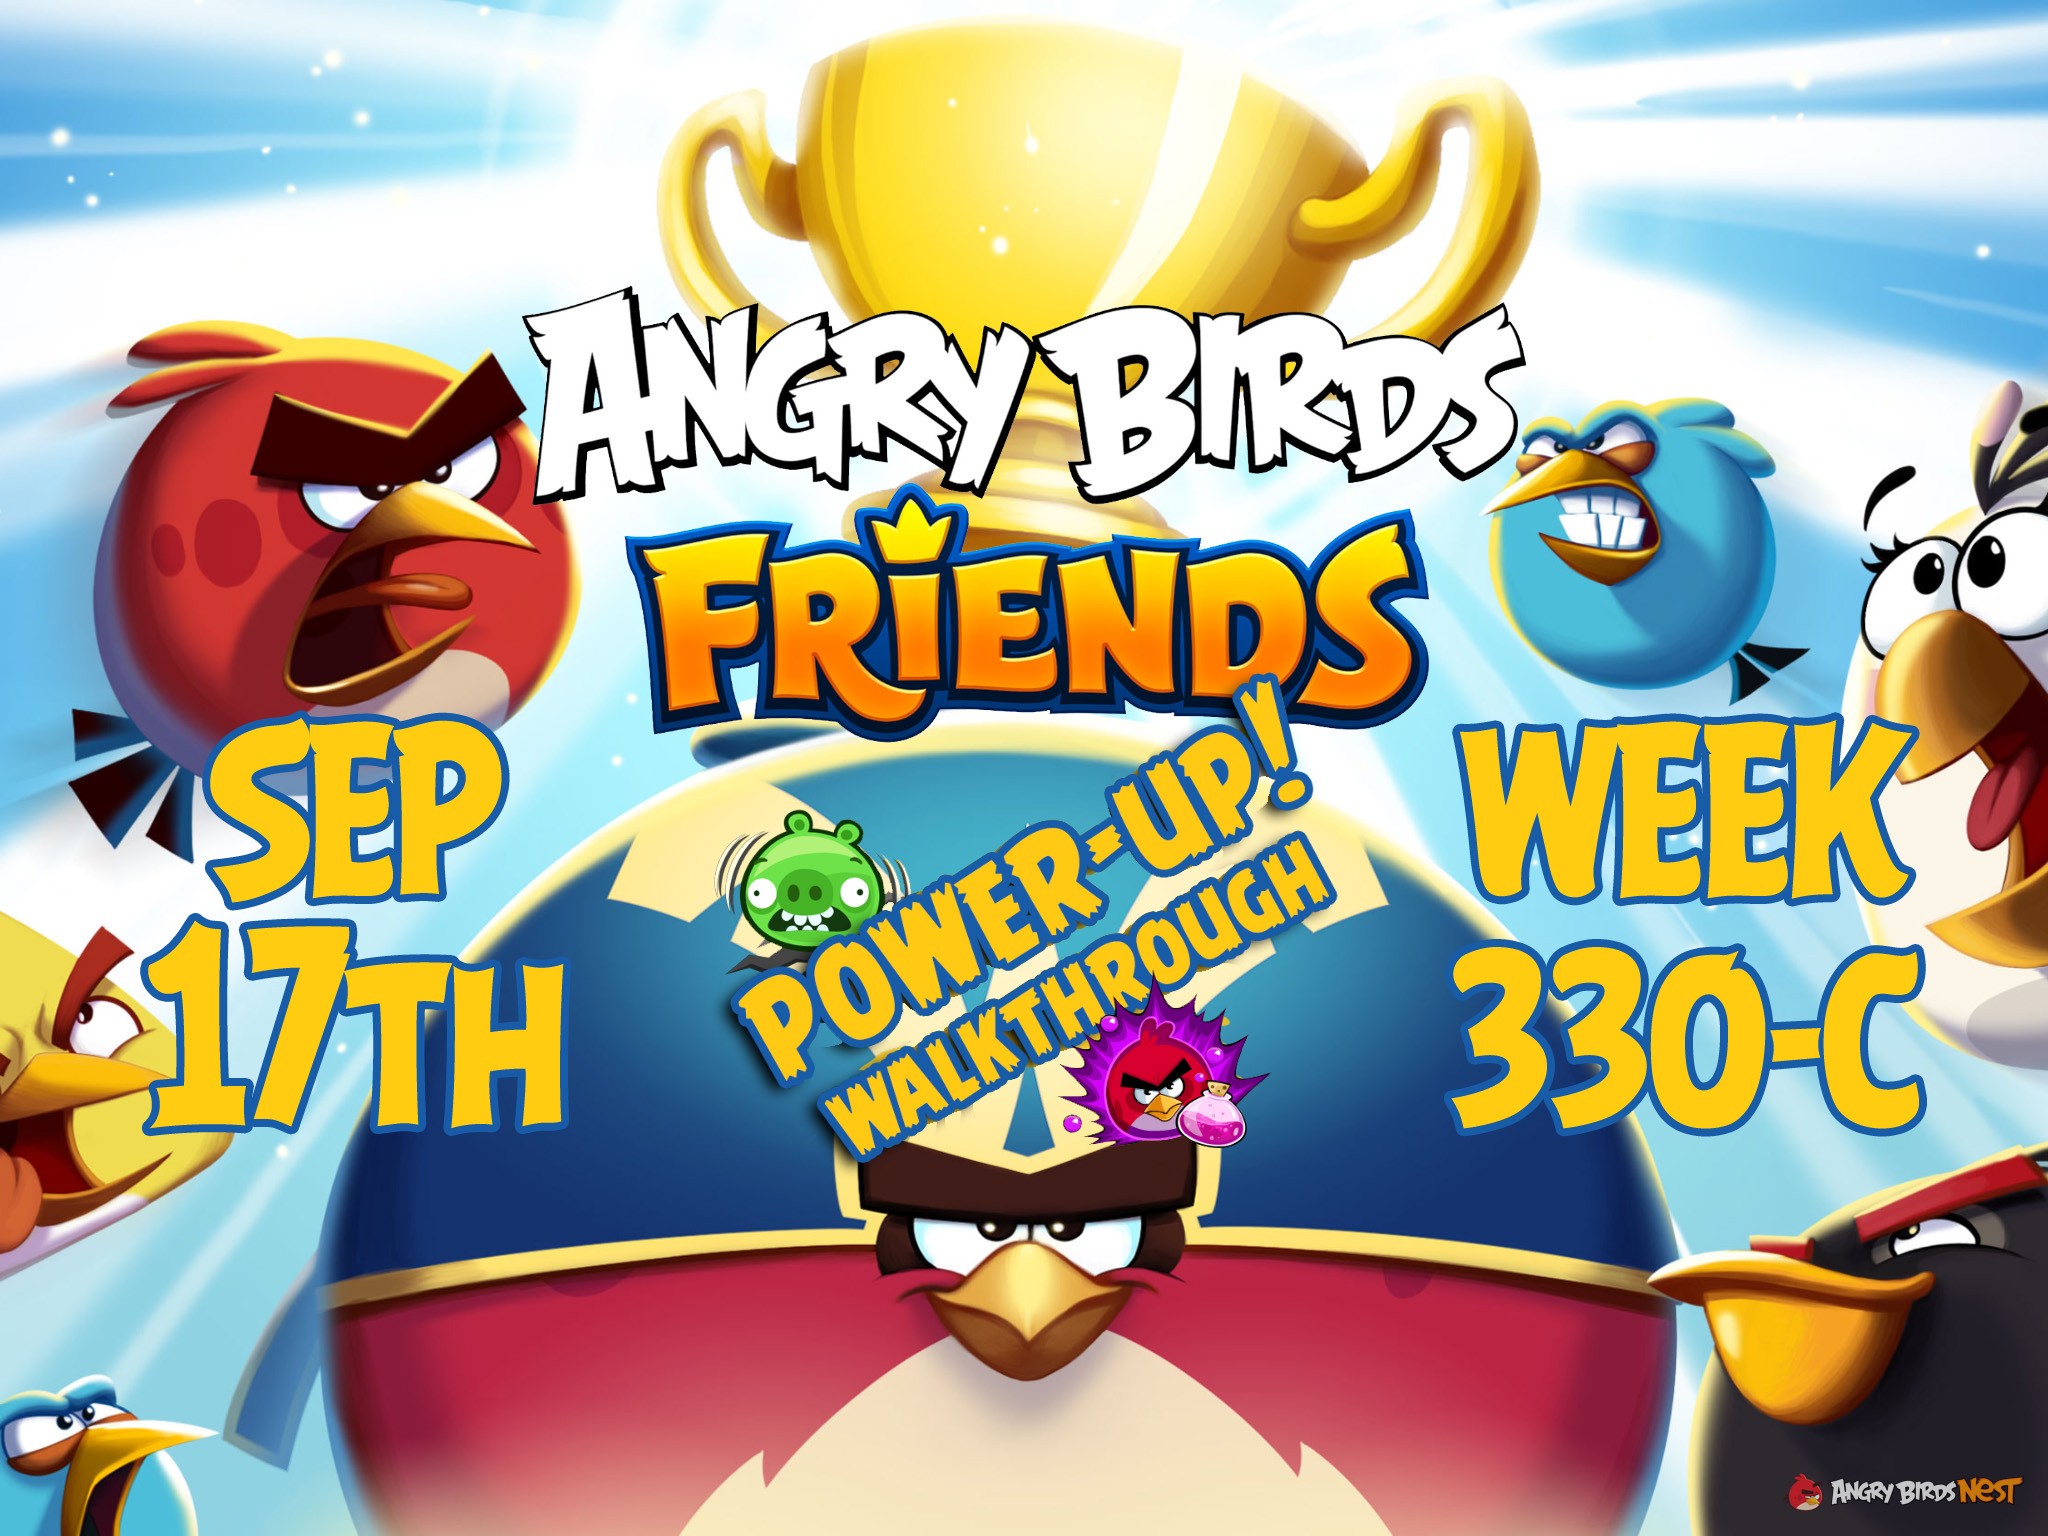 Angry-Birds-Friends-Tournament-Week-330-C-Feature-Image-PU